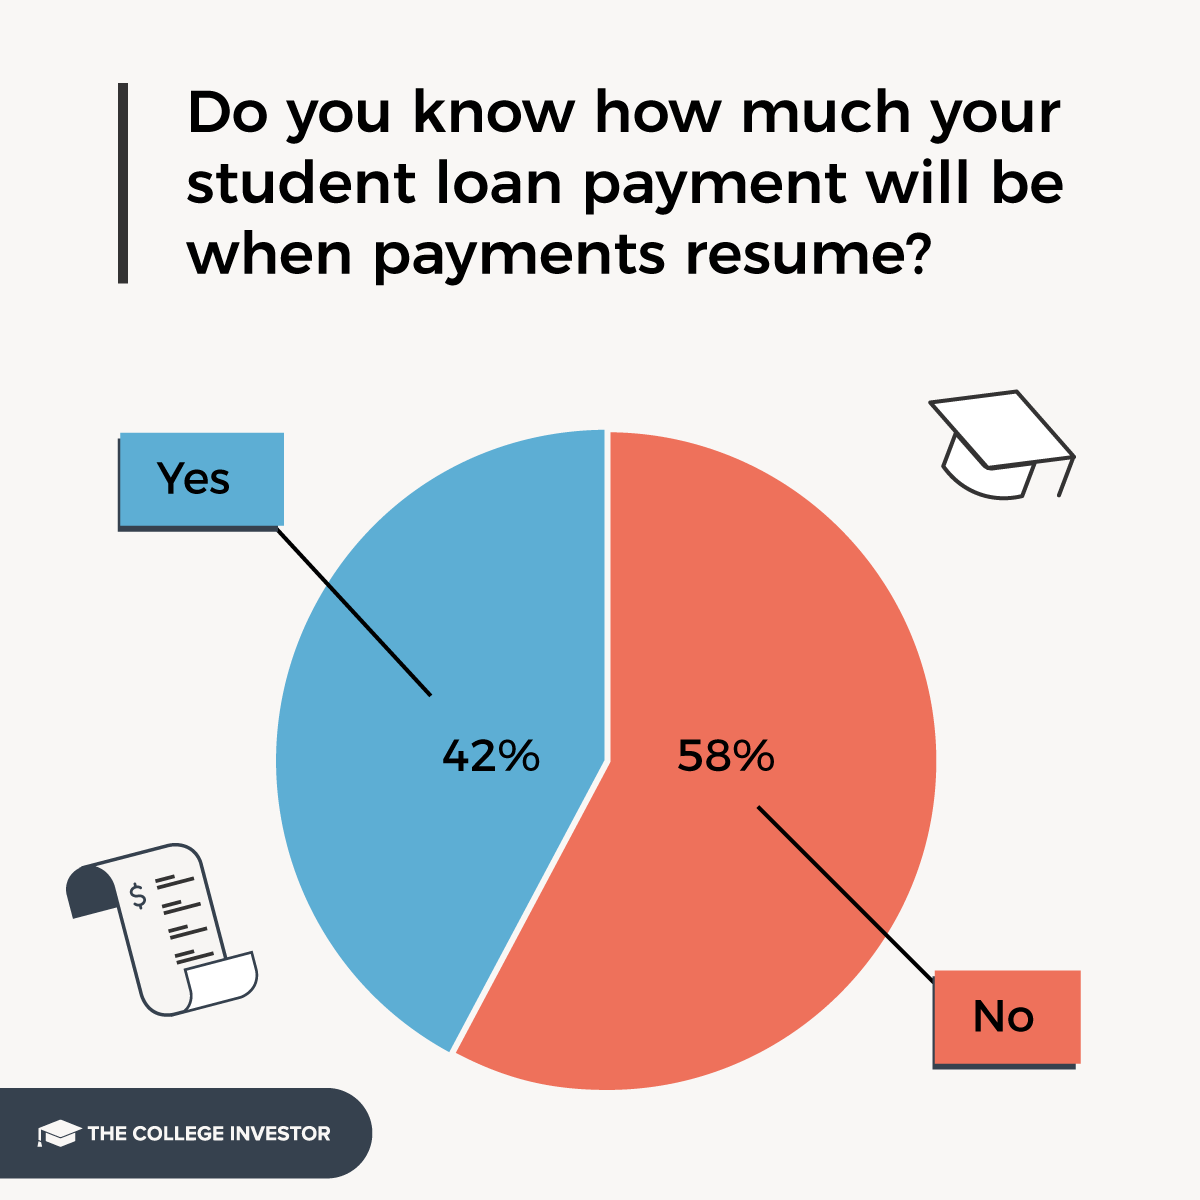 Most borrowers don't know what their student loan payments will be